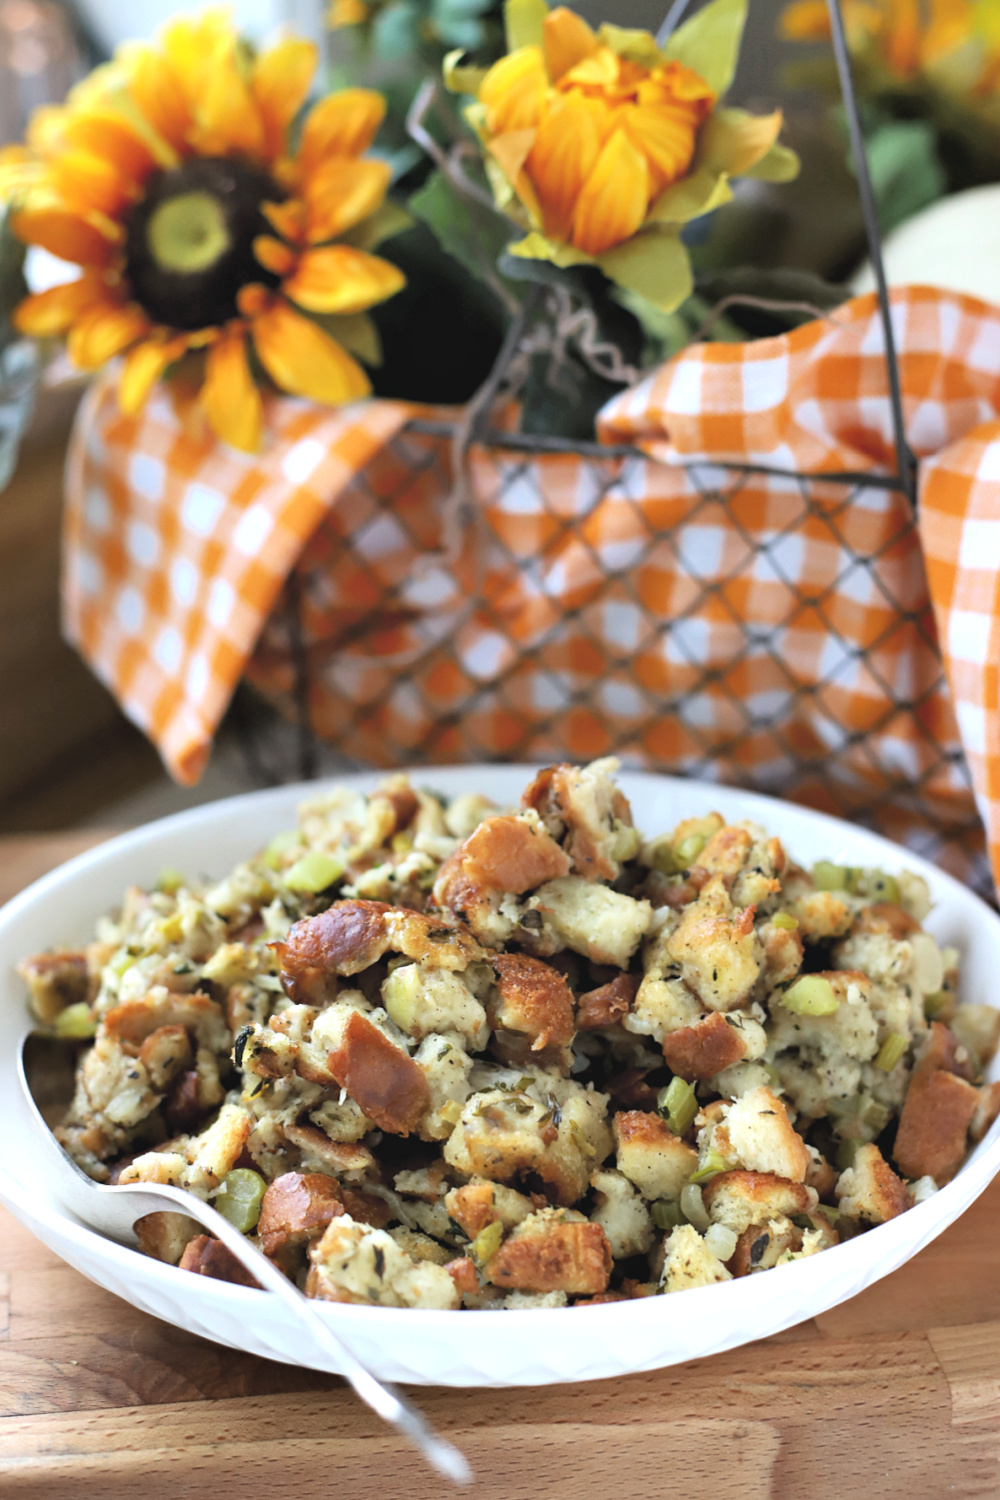 Whether you call it stuffing or filling, this easy recipe for Old Time Stuffing is full of flavor and a perfect side to compliment your Thanksgiving day turkey dinner.